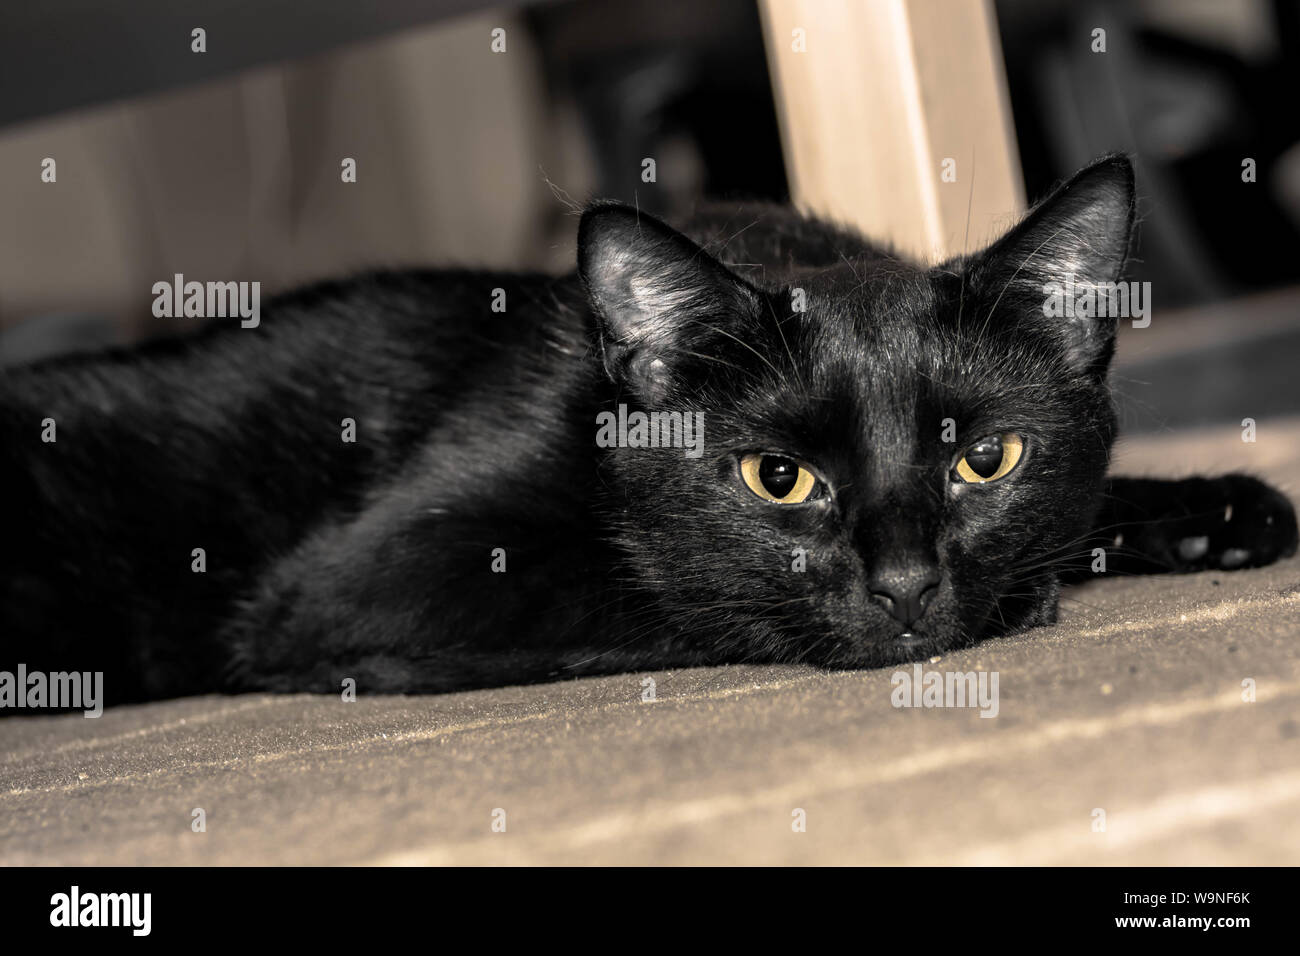 Black Cat With A Beautiful Black Eyes Laying Head On The Floor Stock Photo